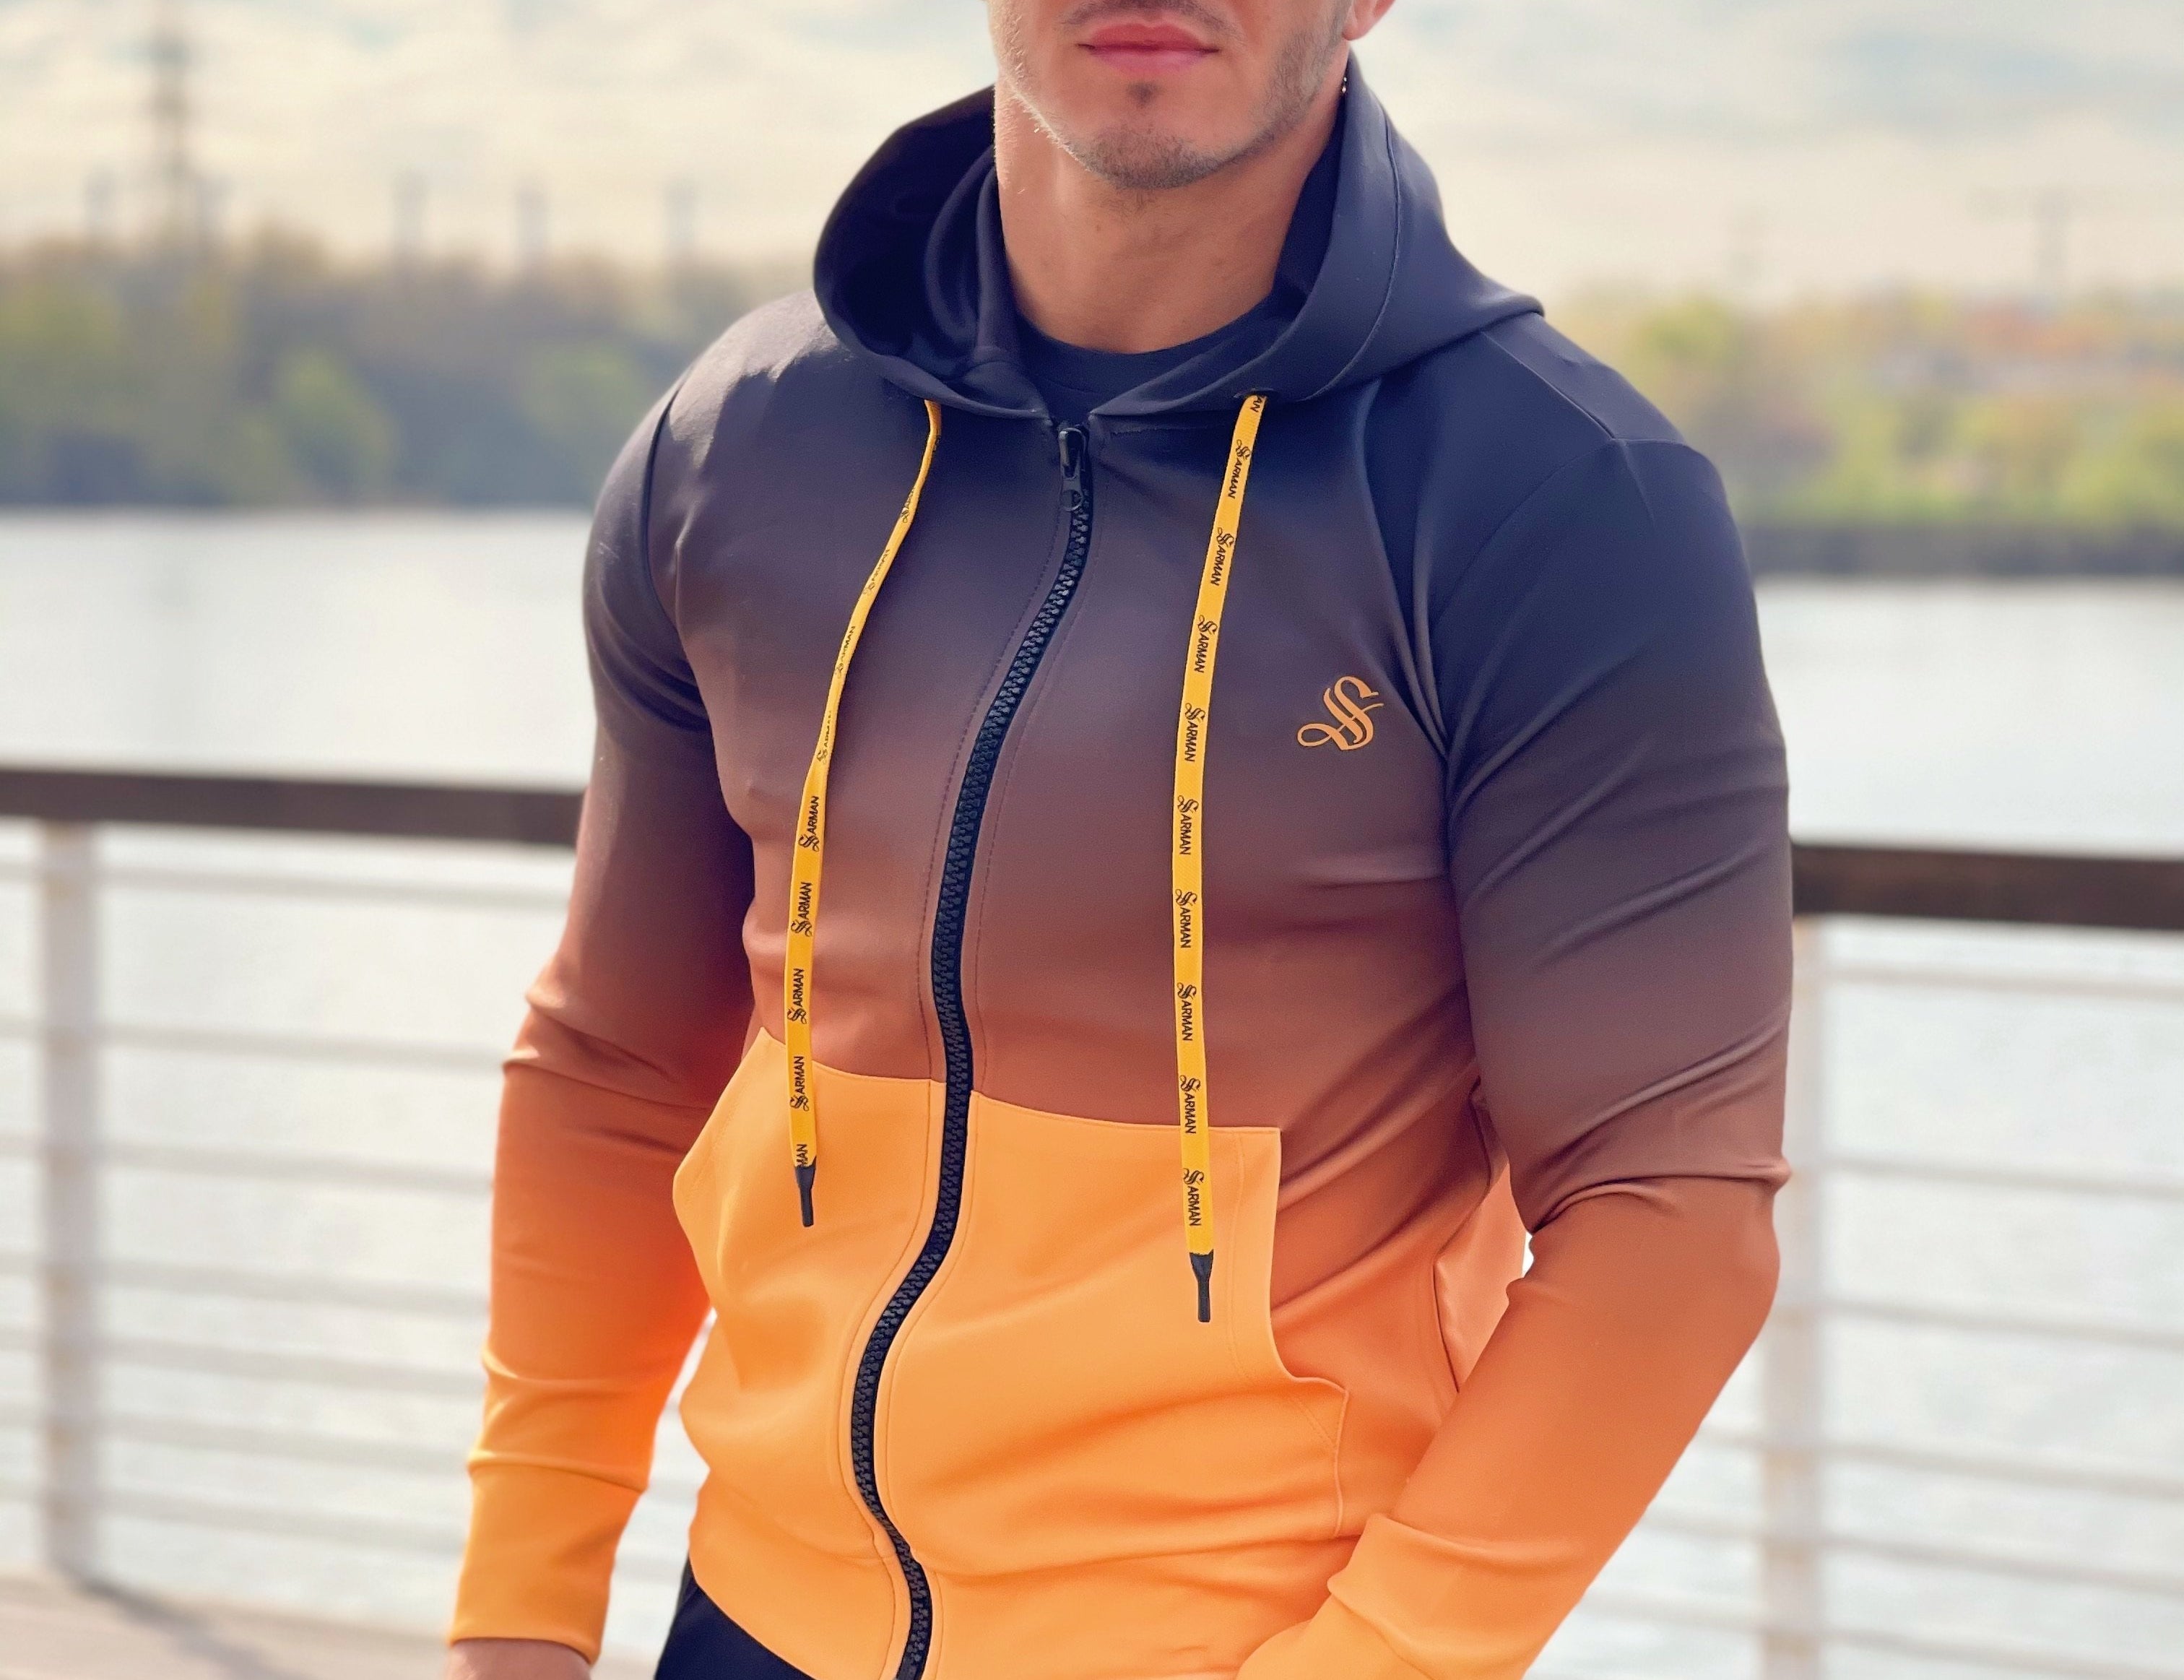 Hines - Black/Yellow Hoodie for Men - Sarman Fashion - Wholesale Clothing Fashion Brand for Men from Canada